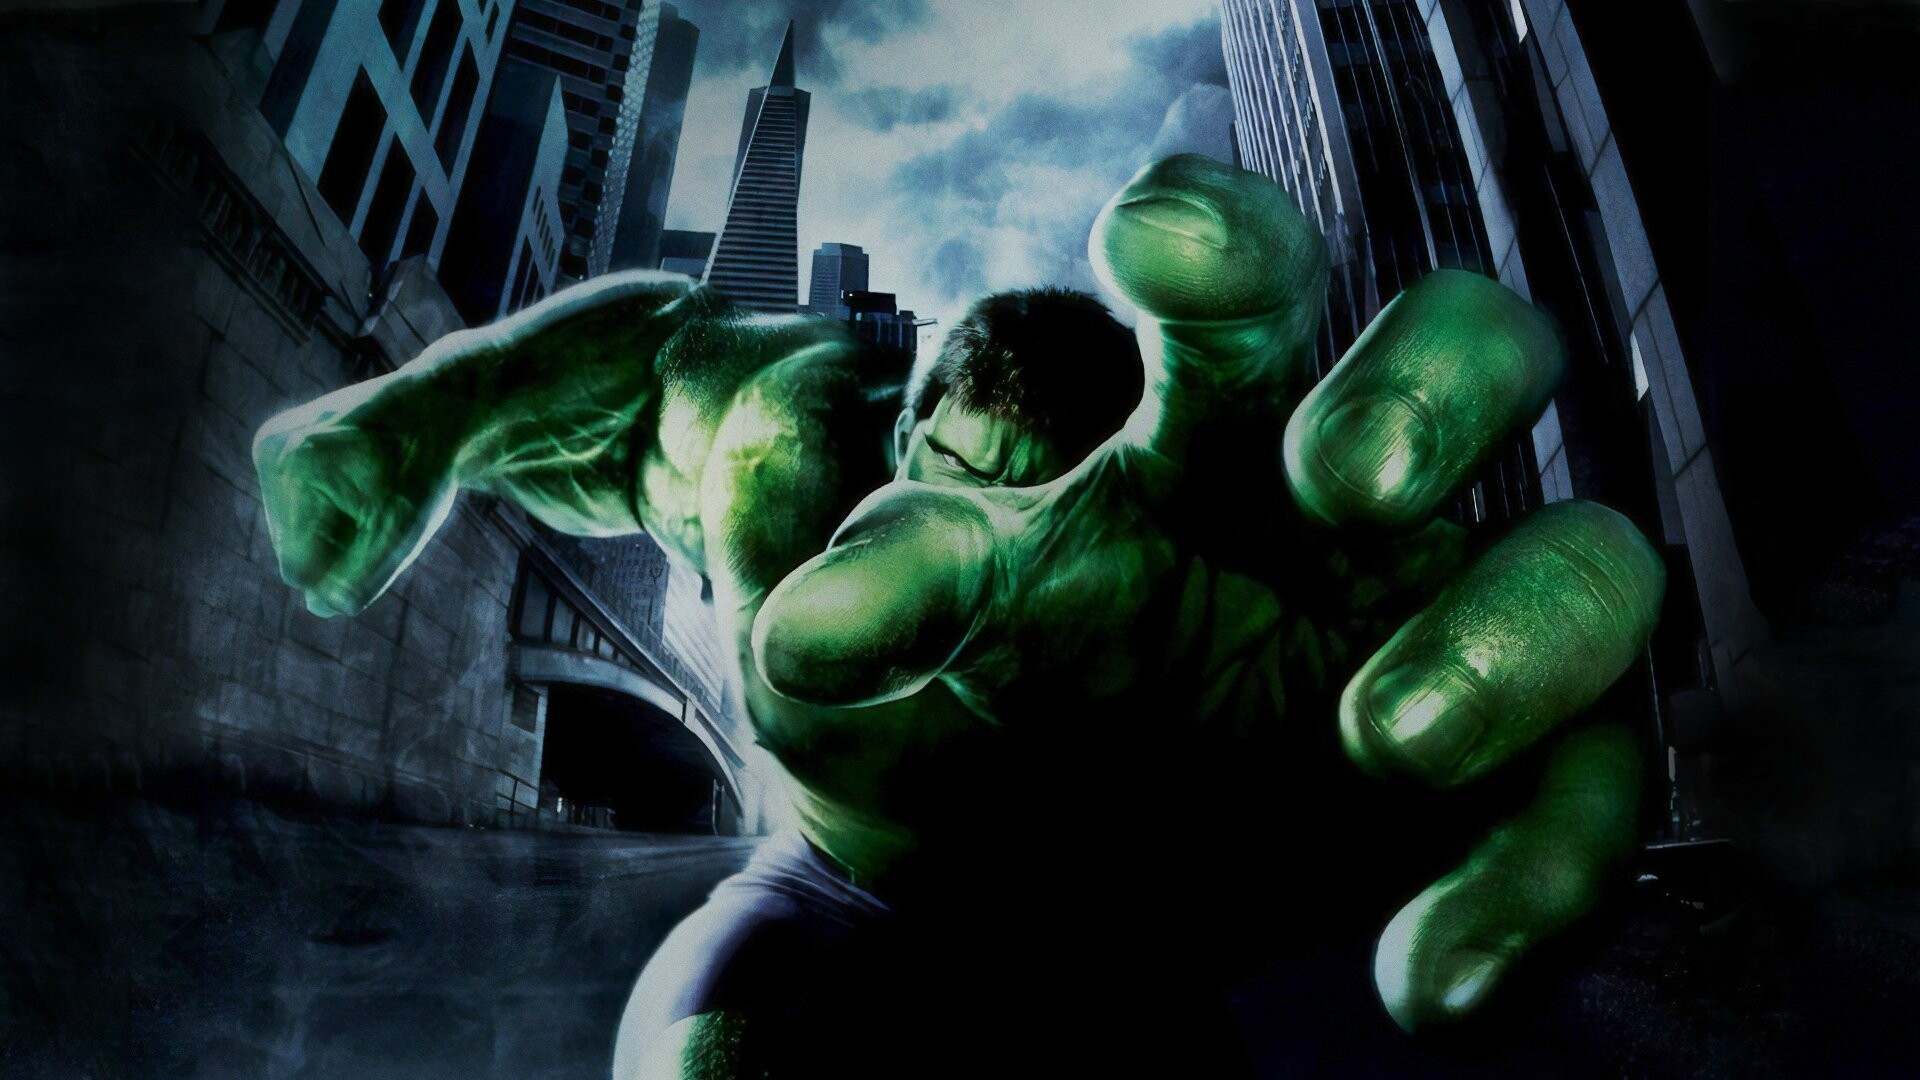 Hulk: One of Marvel’s most-recognizable characters, Antihero. 1920x1080 Full HD Background.